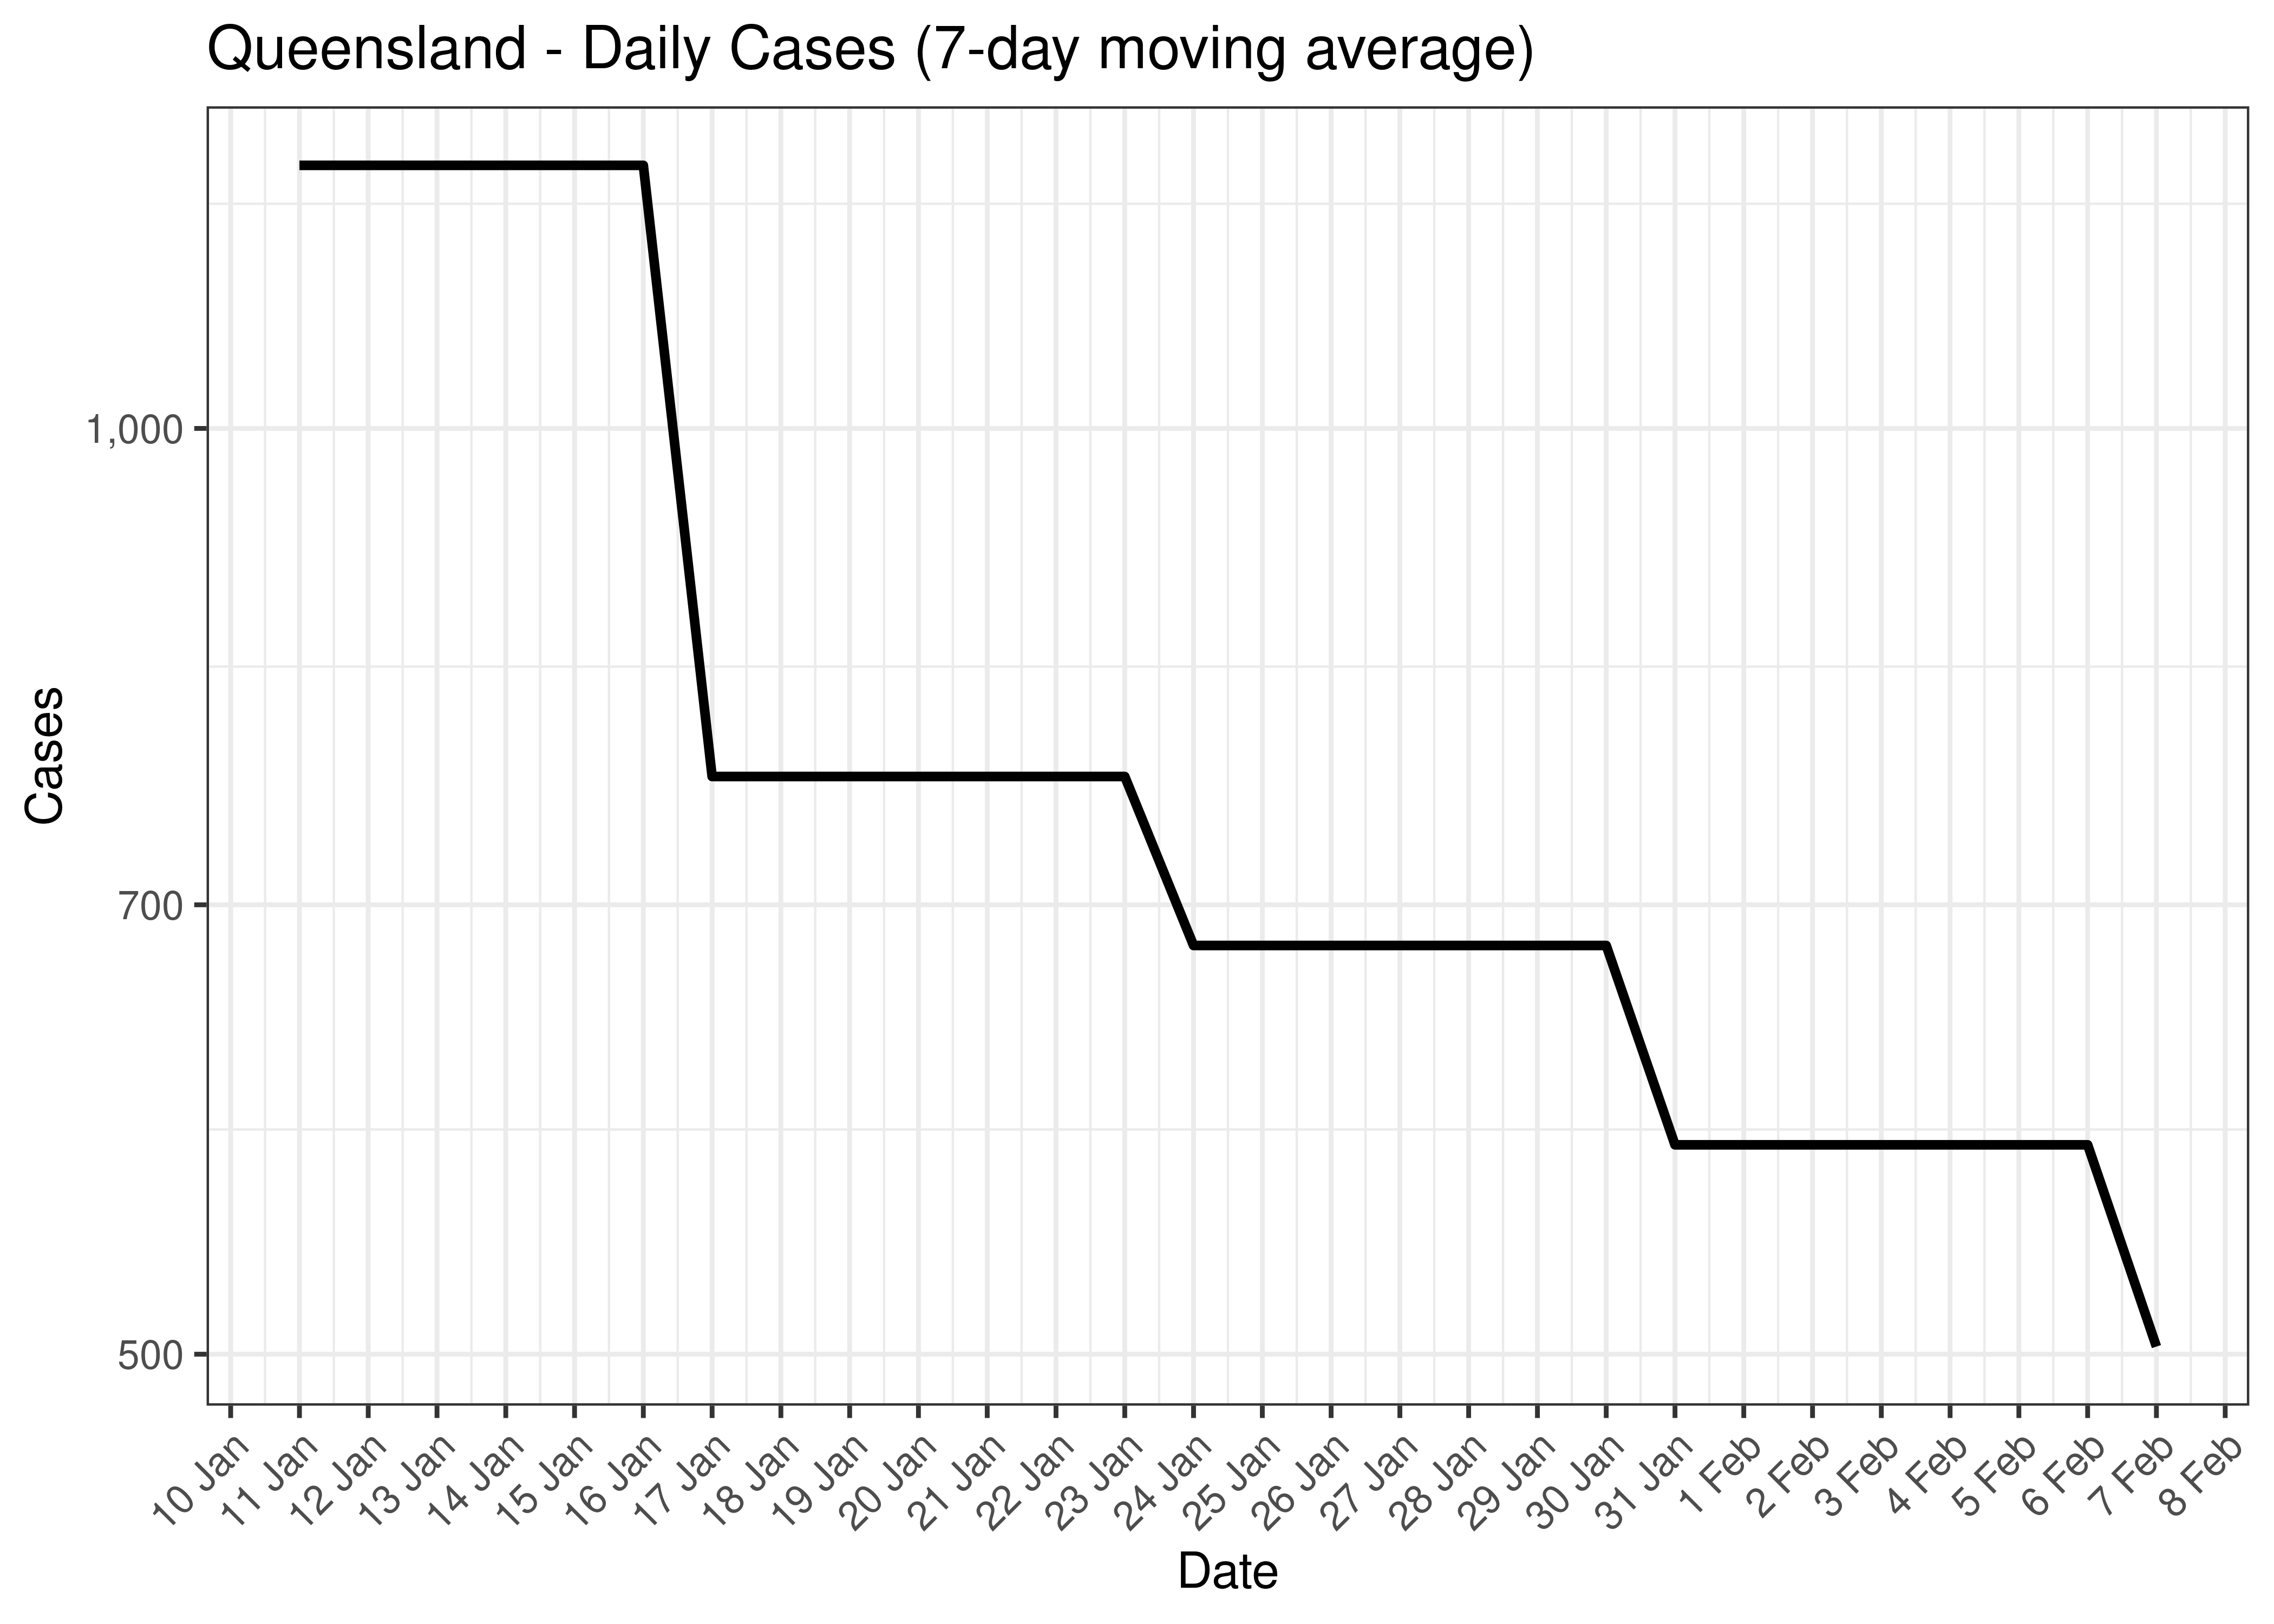 Queensland - Daily Cases for Last 30-days (7-day moving average)